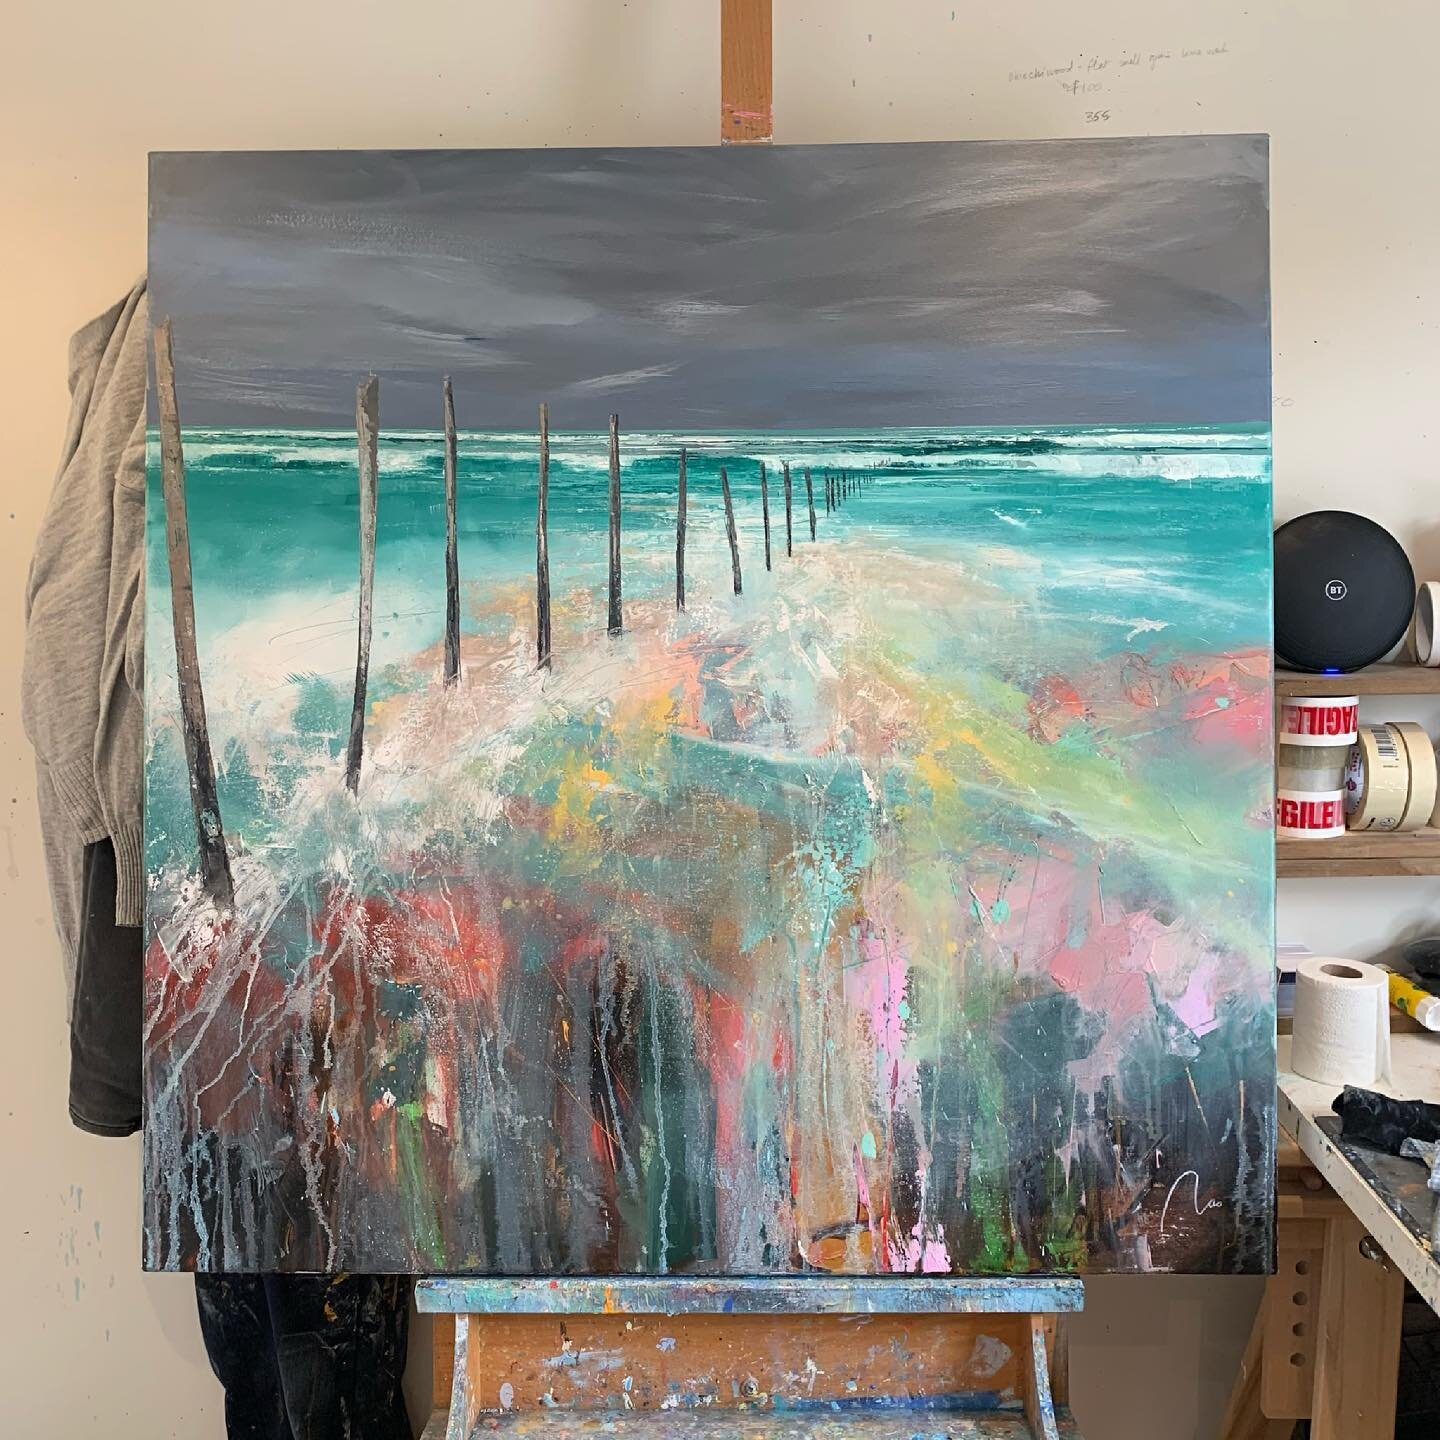 Inspired by a fantastic week in Northern Ireland, here&rsquo;s a moody and atmospheric Port Stewart Strand! 

#naomcdowellart #cornwall #londonartist #oilpaint #oiloncanvas #northcoast #colour #abstractpainting #northernireland #contemporaryart #land